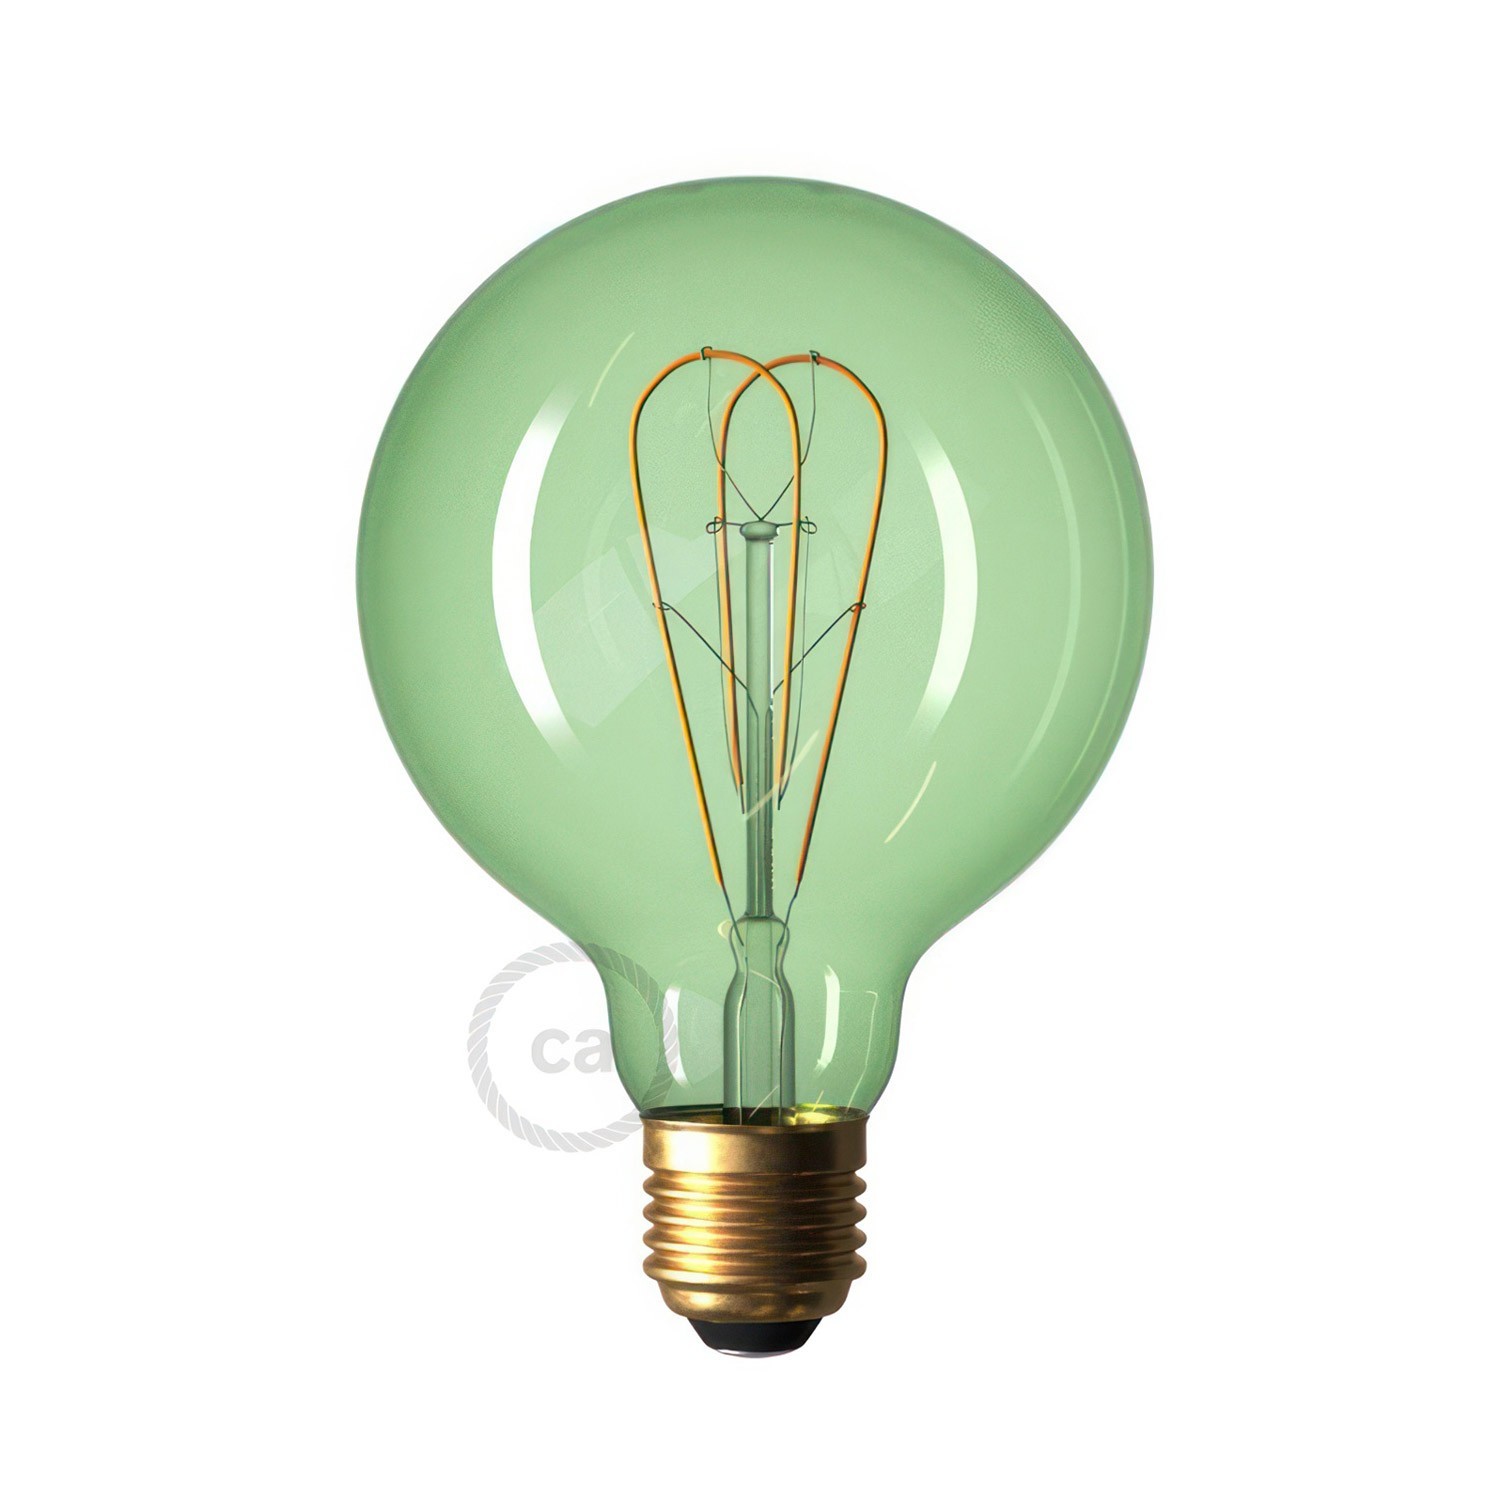 LED Emerald Light Bulb - Globe G95 Curved Double Loop Filament - 5W 280Lm E27 2200K Dimmable